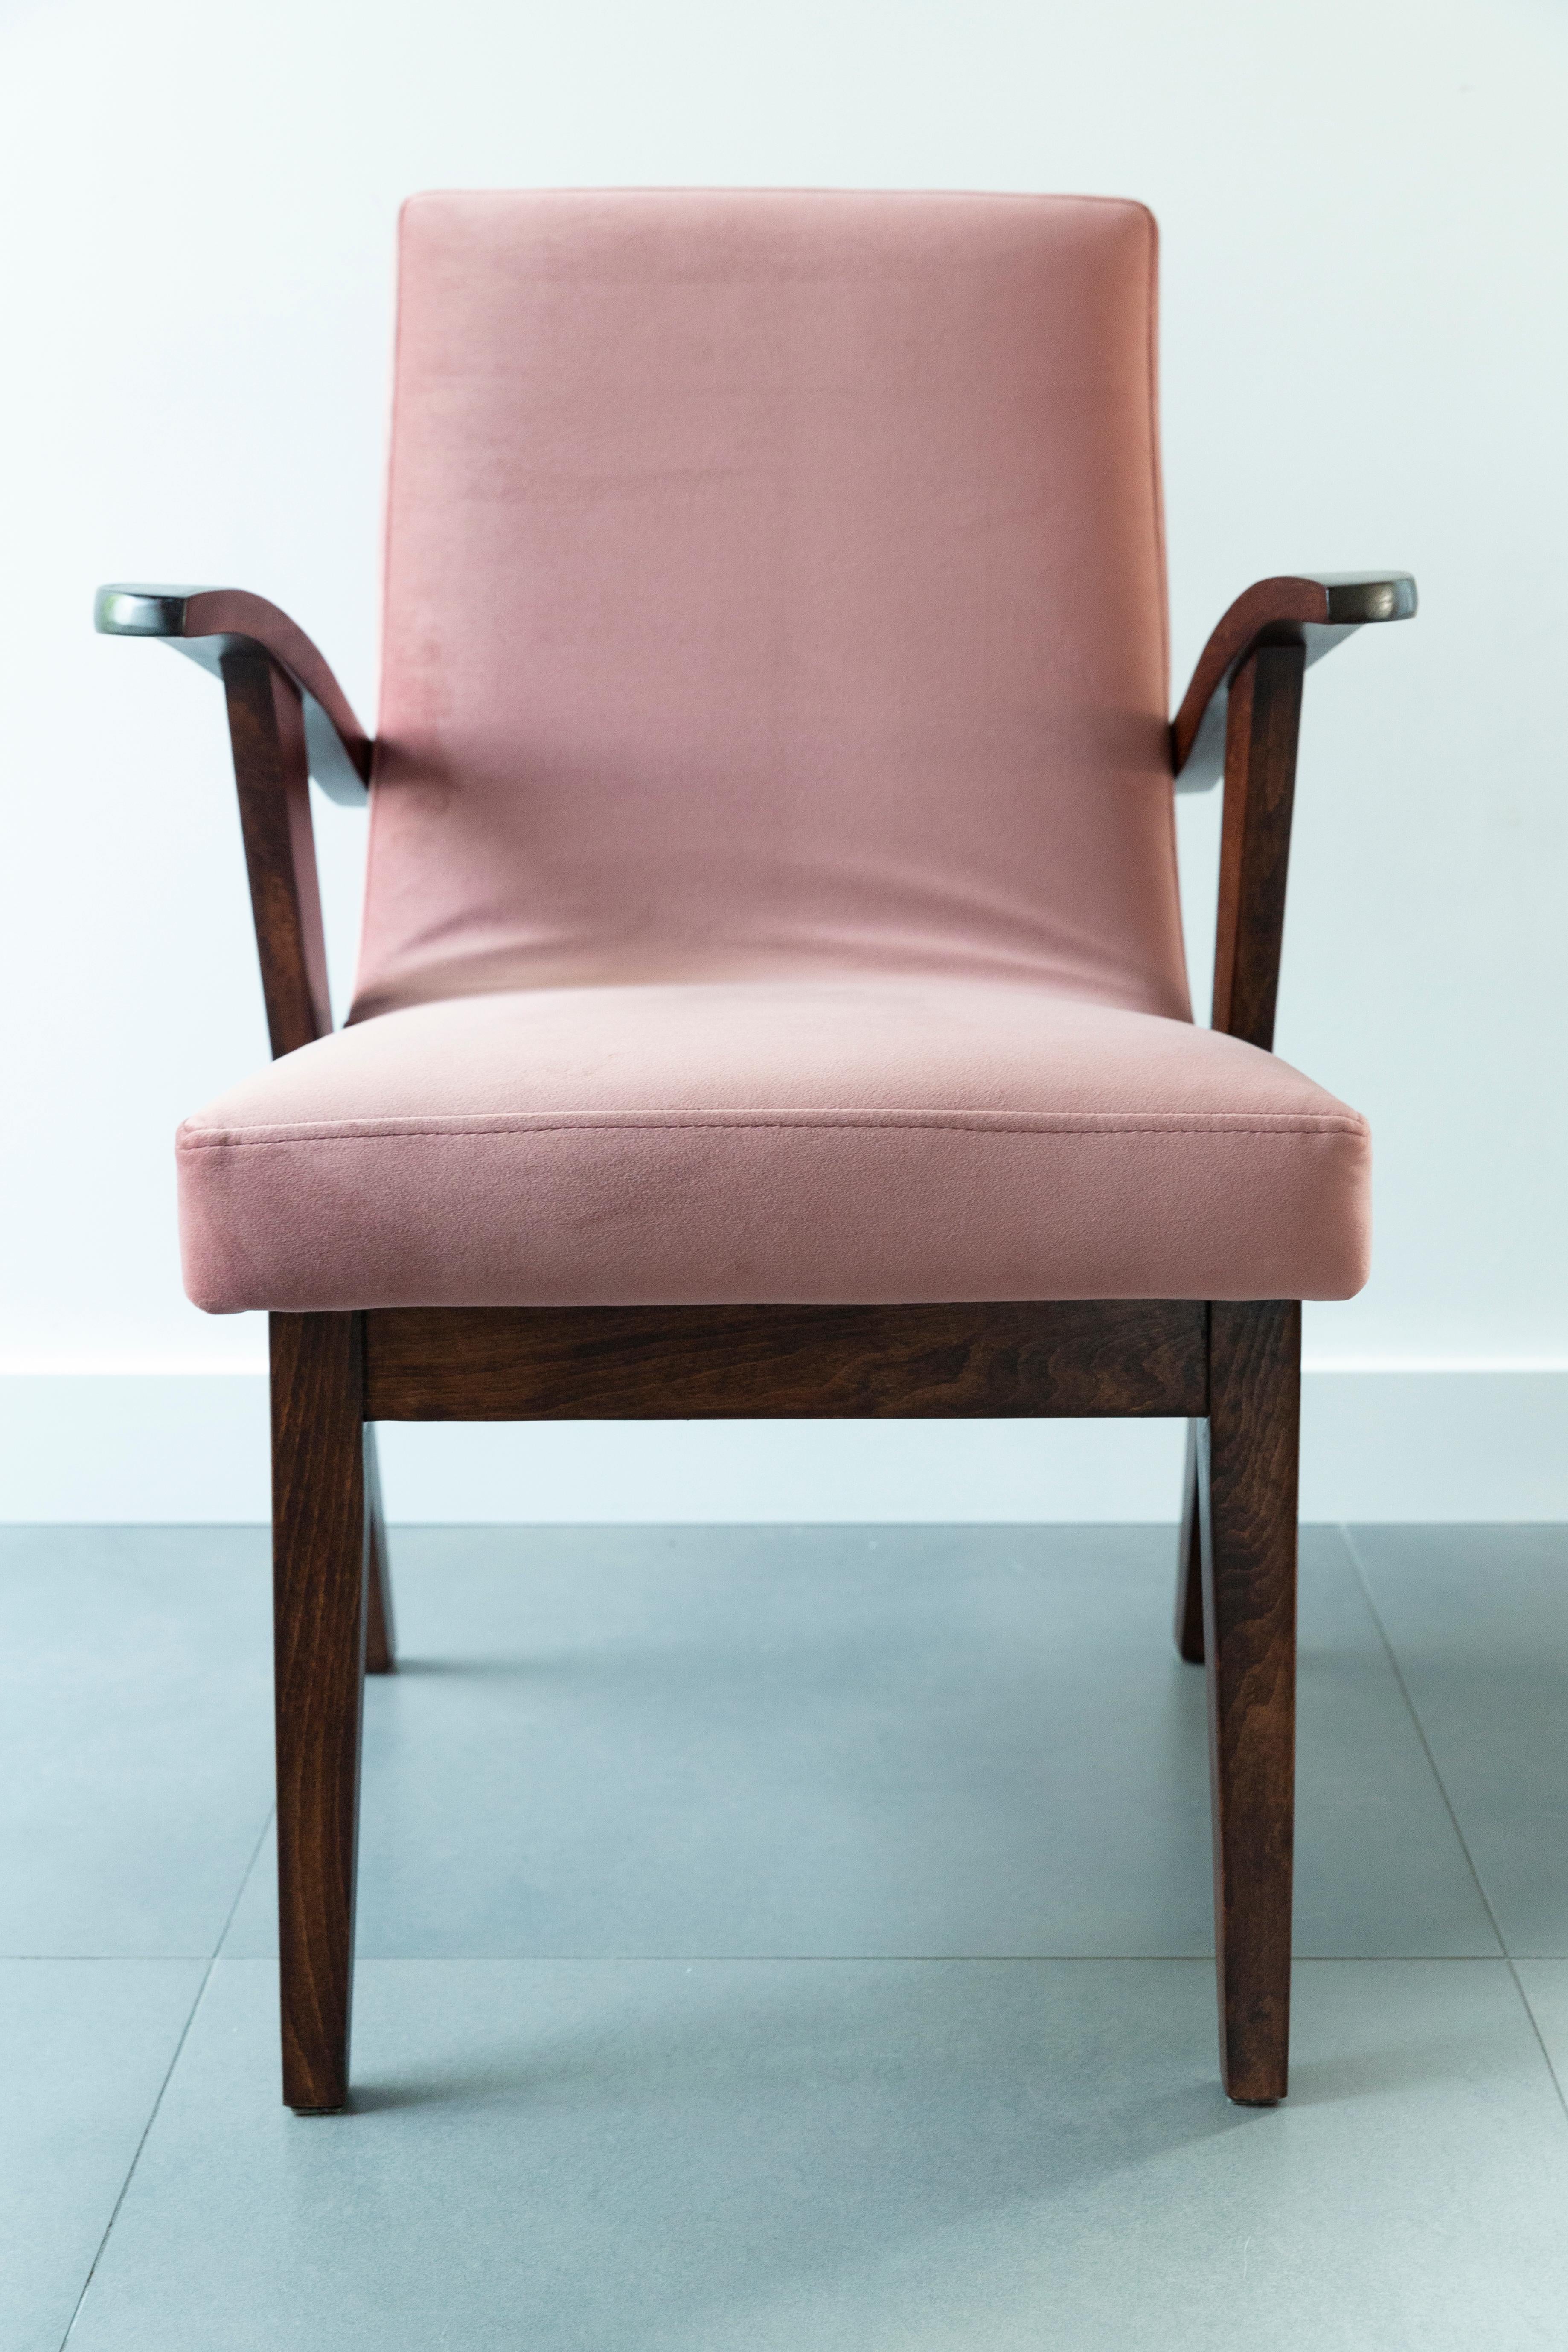 Twelve 20th Century Armchairs in Dusty Pink Velvet by Mieczyslaw Puchala, 1960s For Sale 6